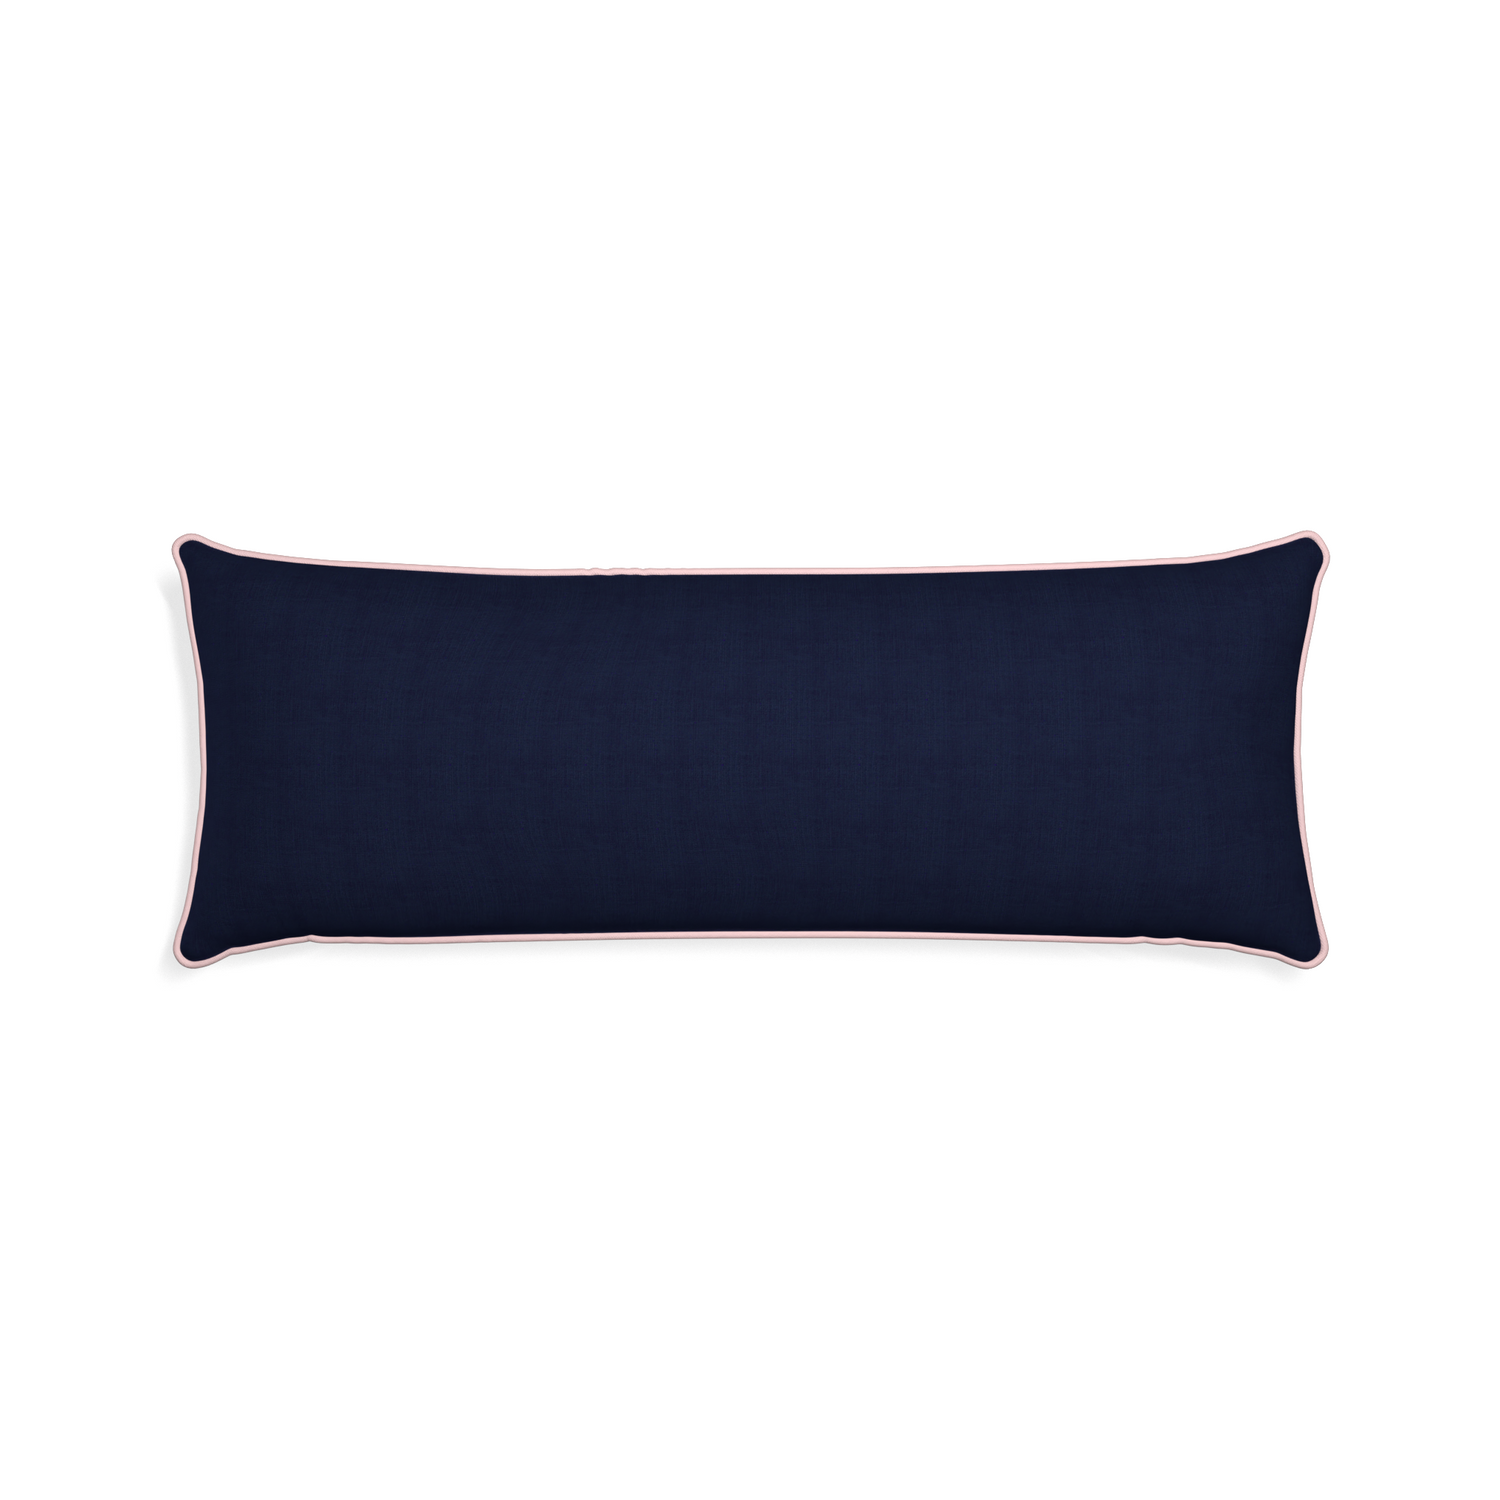 Xl-lumbar midnight custom navy bluepillow with petal piping on white background